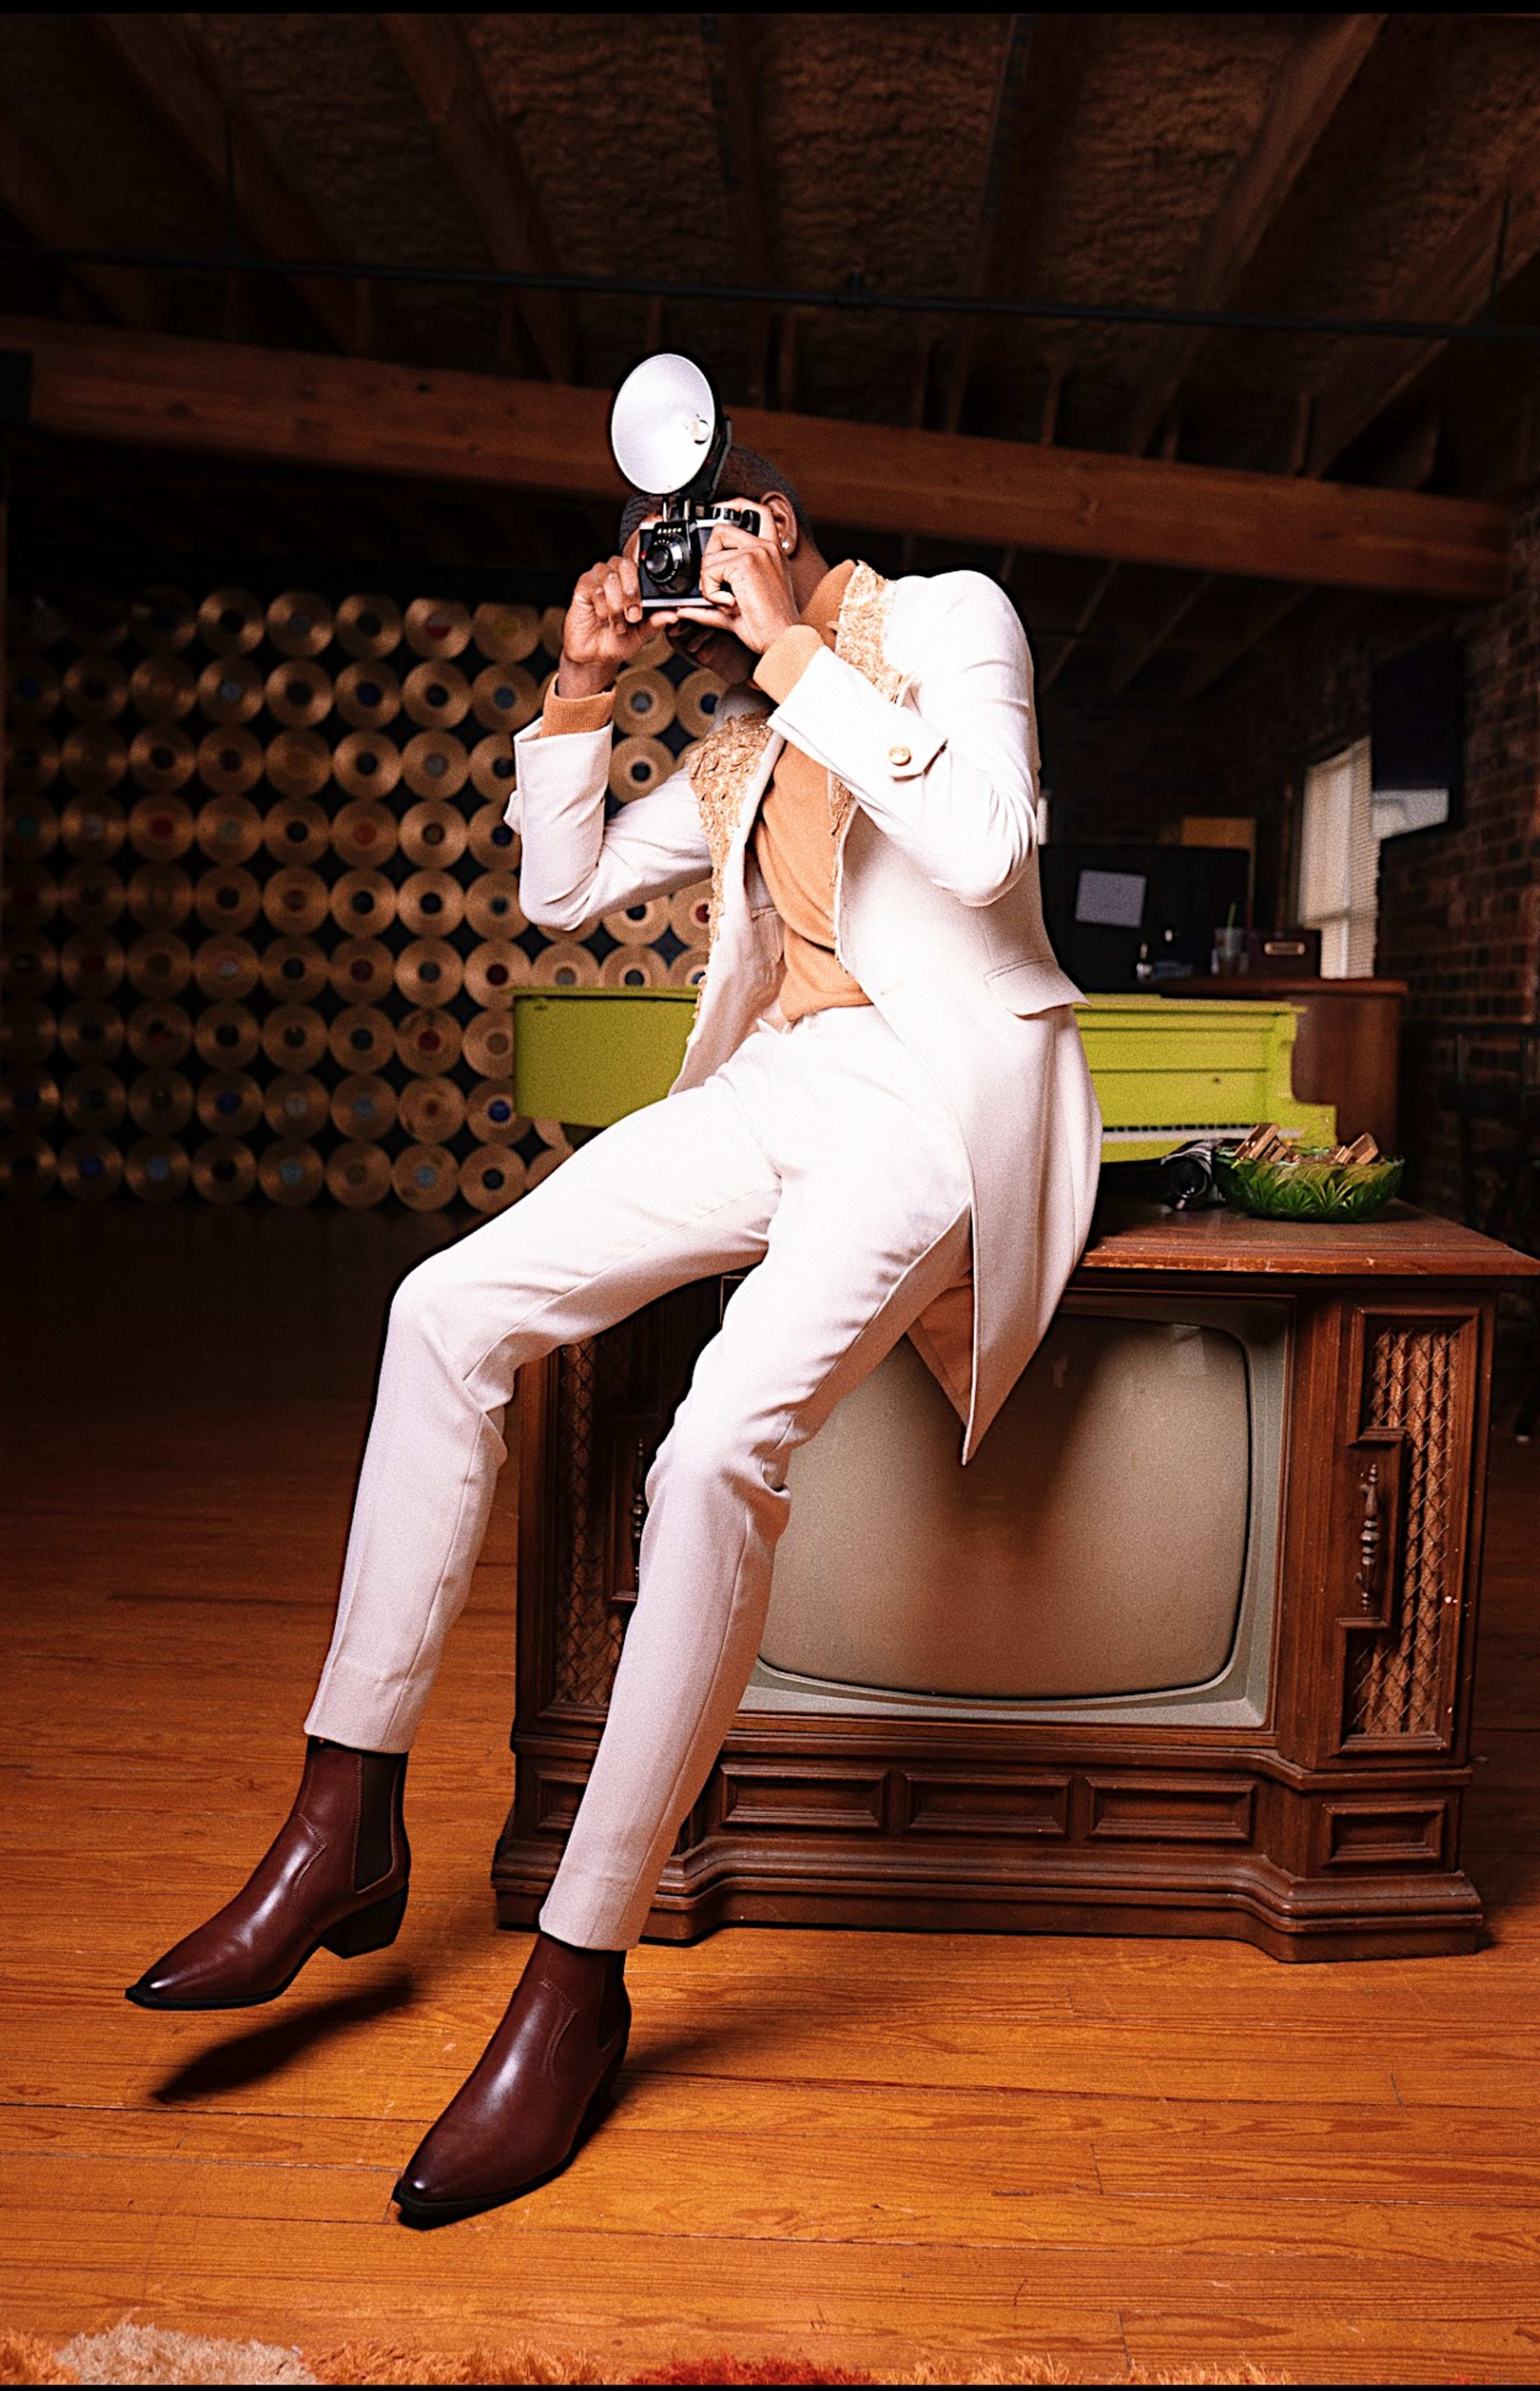 A man in a white suit posing on a brown TV during a retro photo shoot.